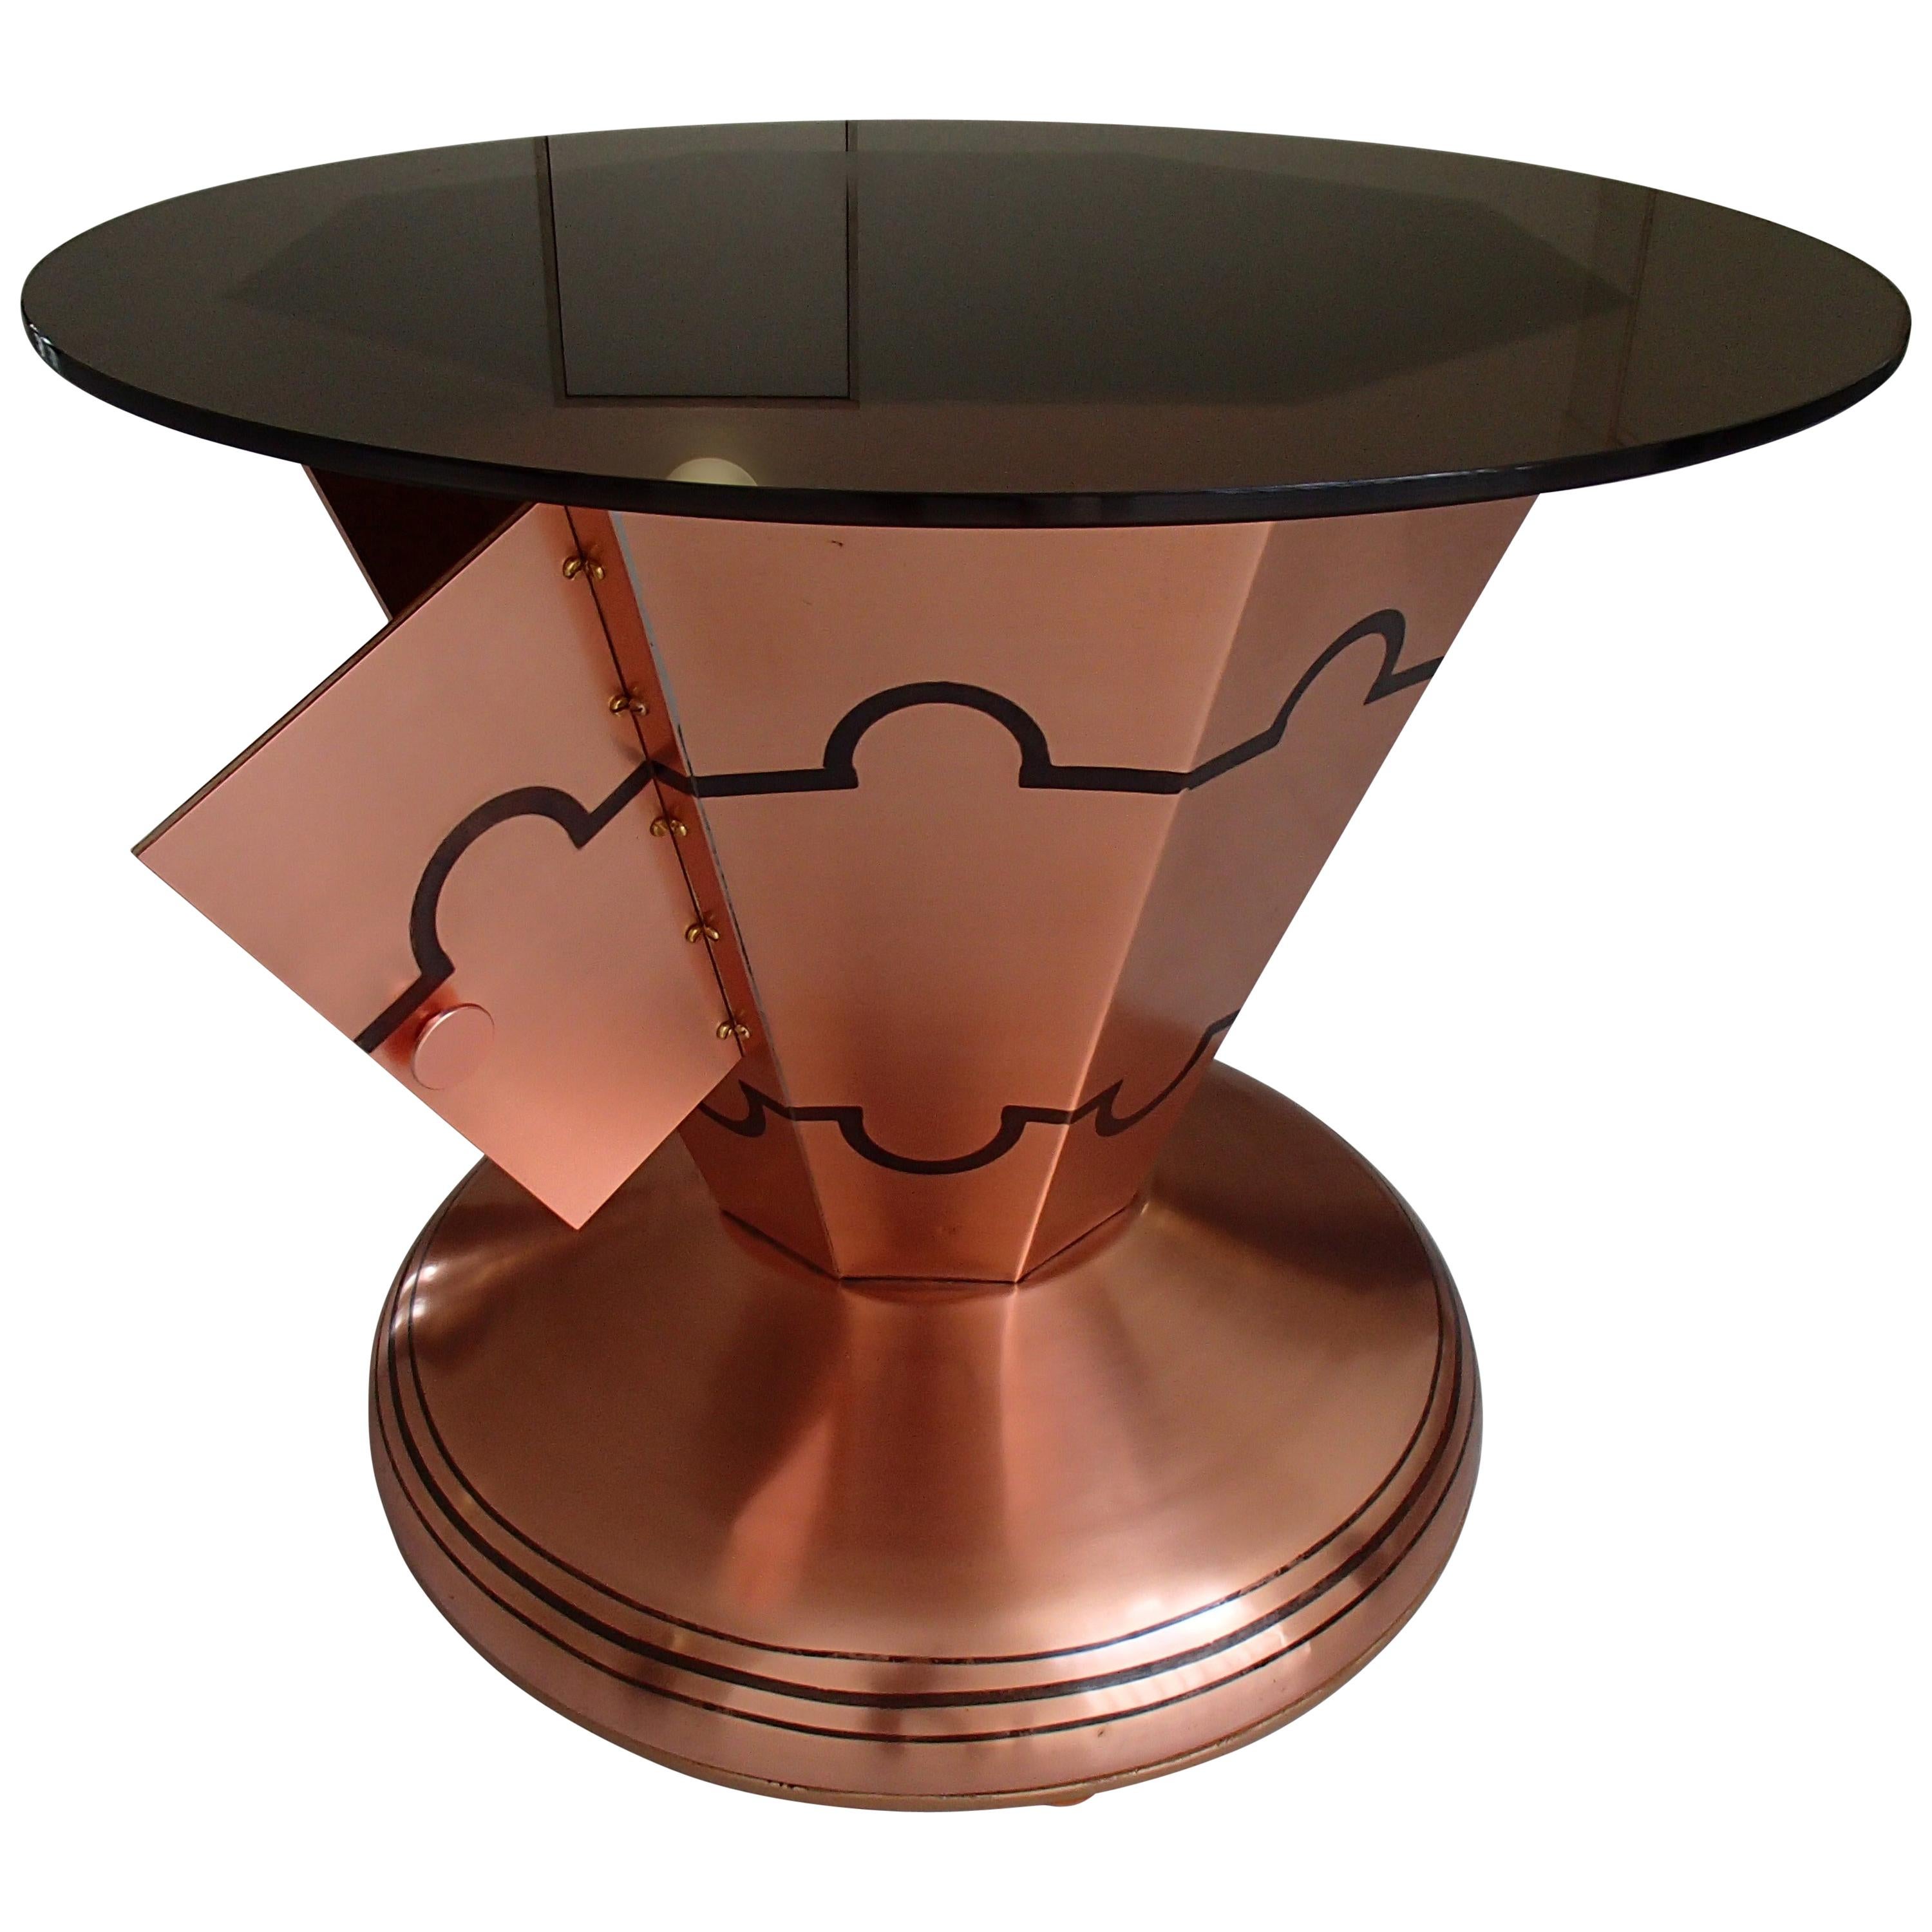 Art Deco Copper Bar Table on Wheels with Turnable Tray Inside and Glass Top For Sale